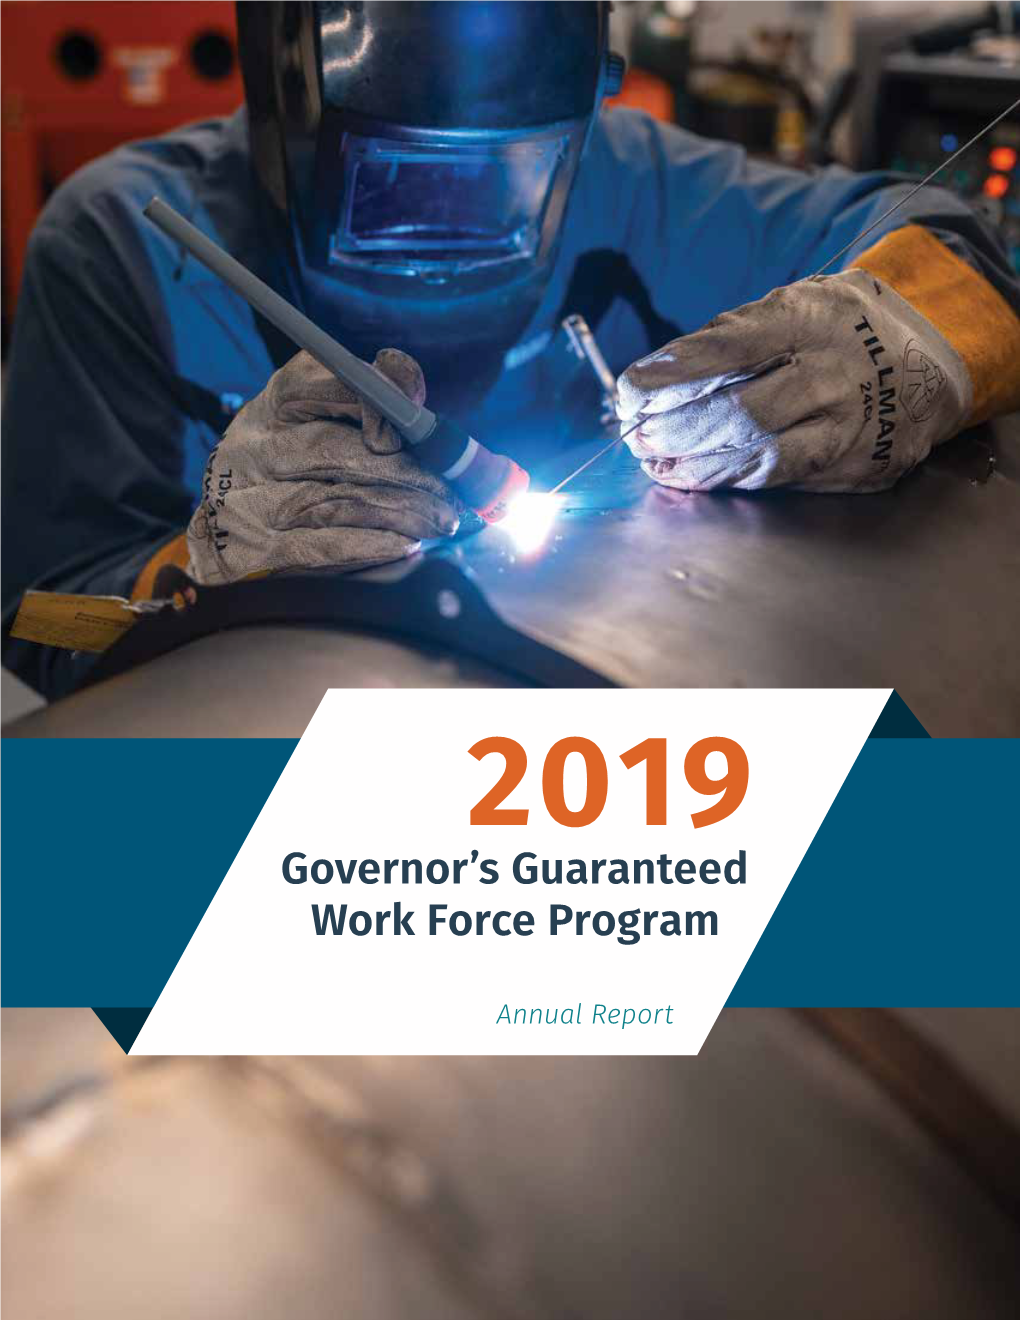 Governor's Guaranteed Work Force Program